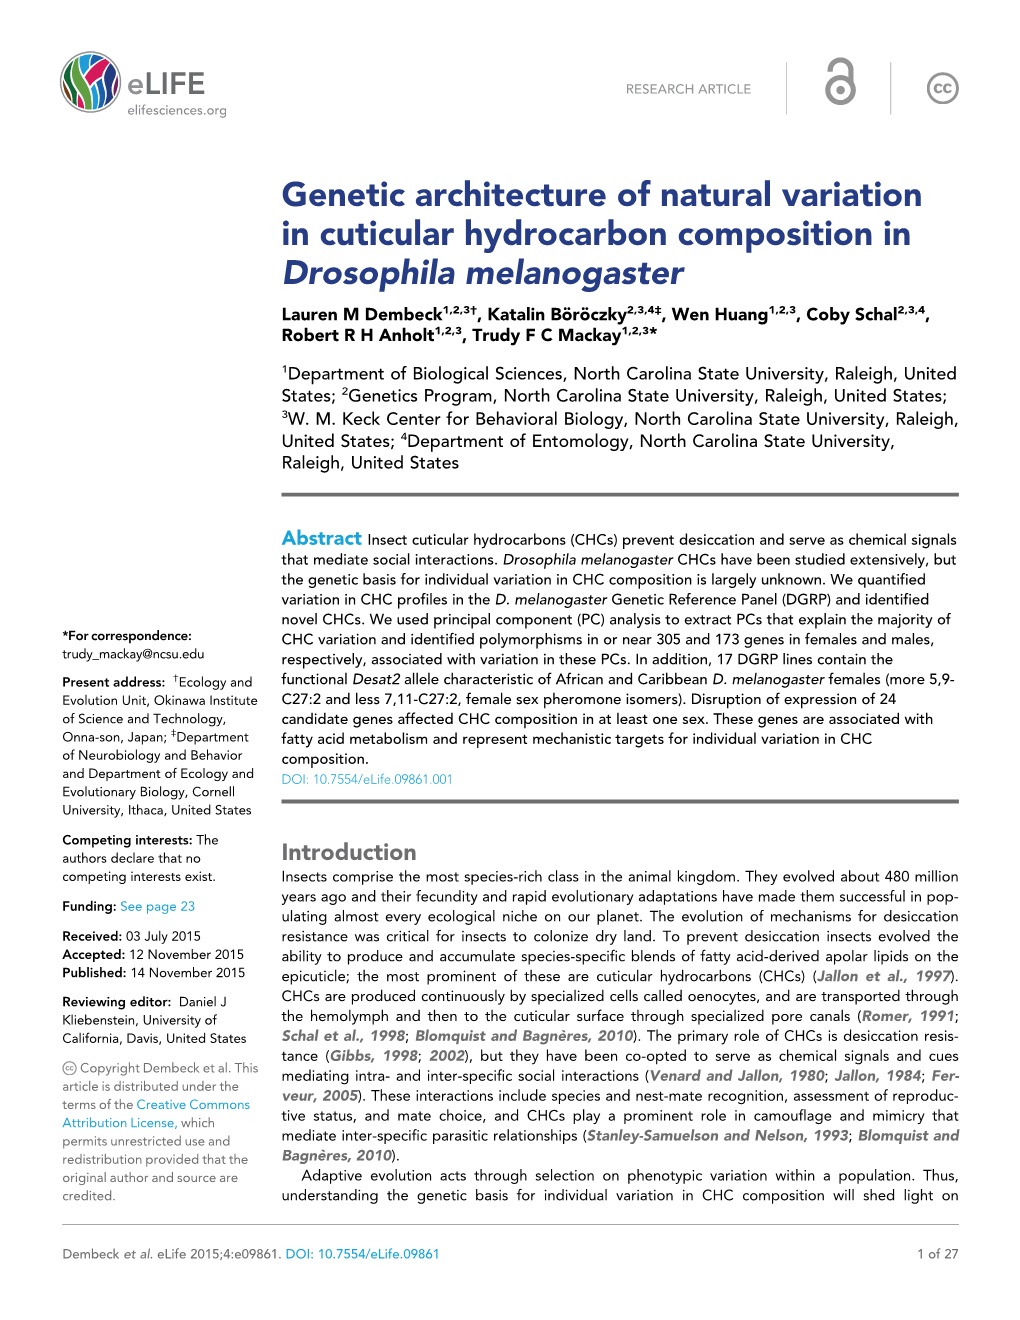 Genetic Architecture of Natural Variation in Cuticular Hydrocarbon